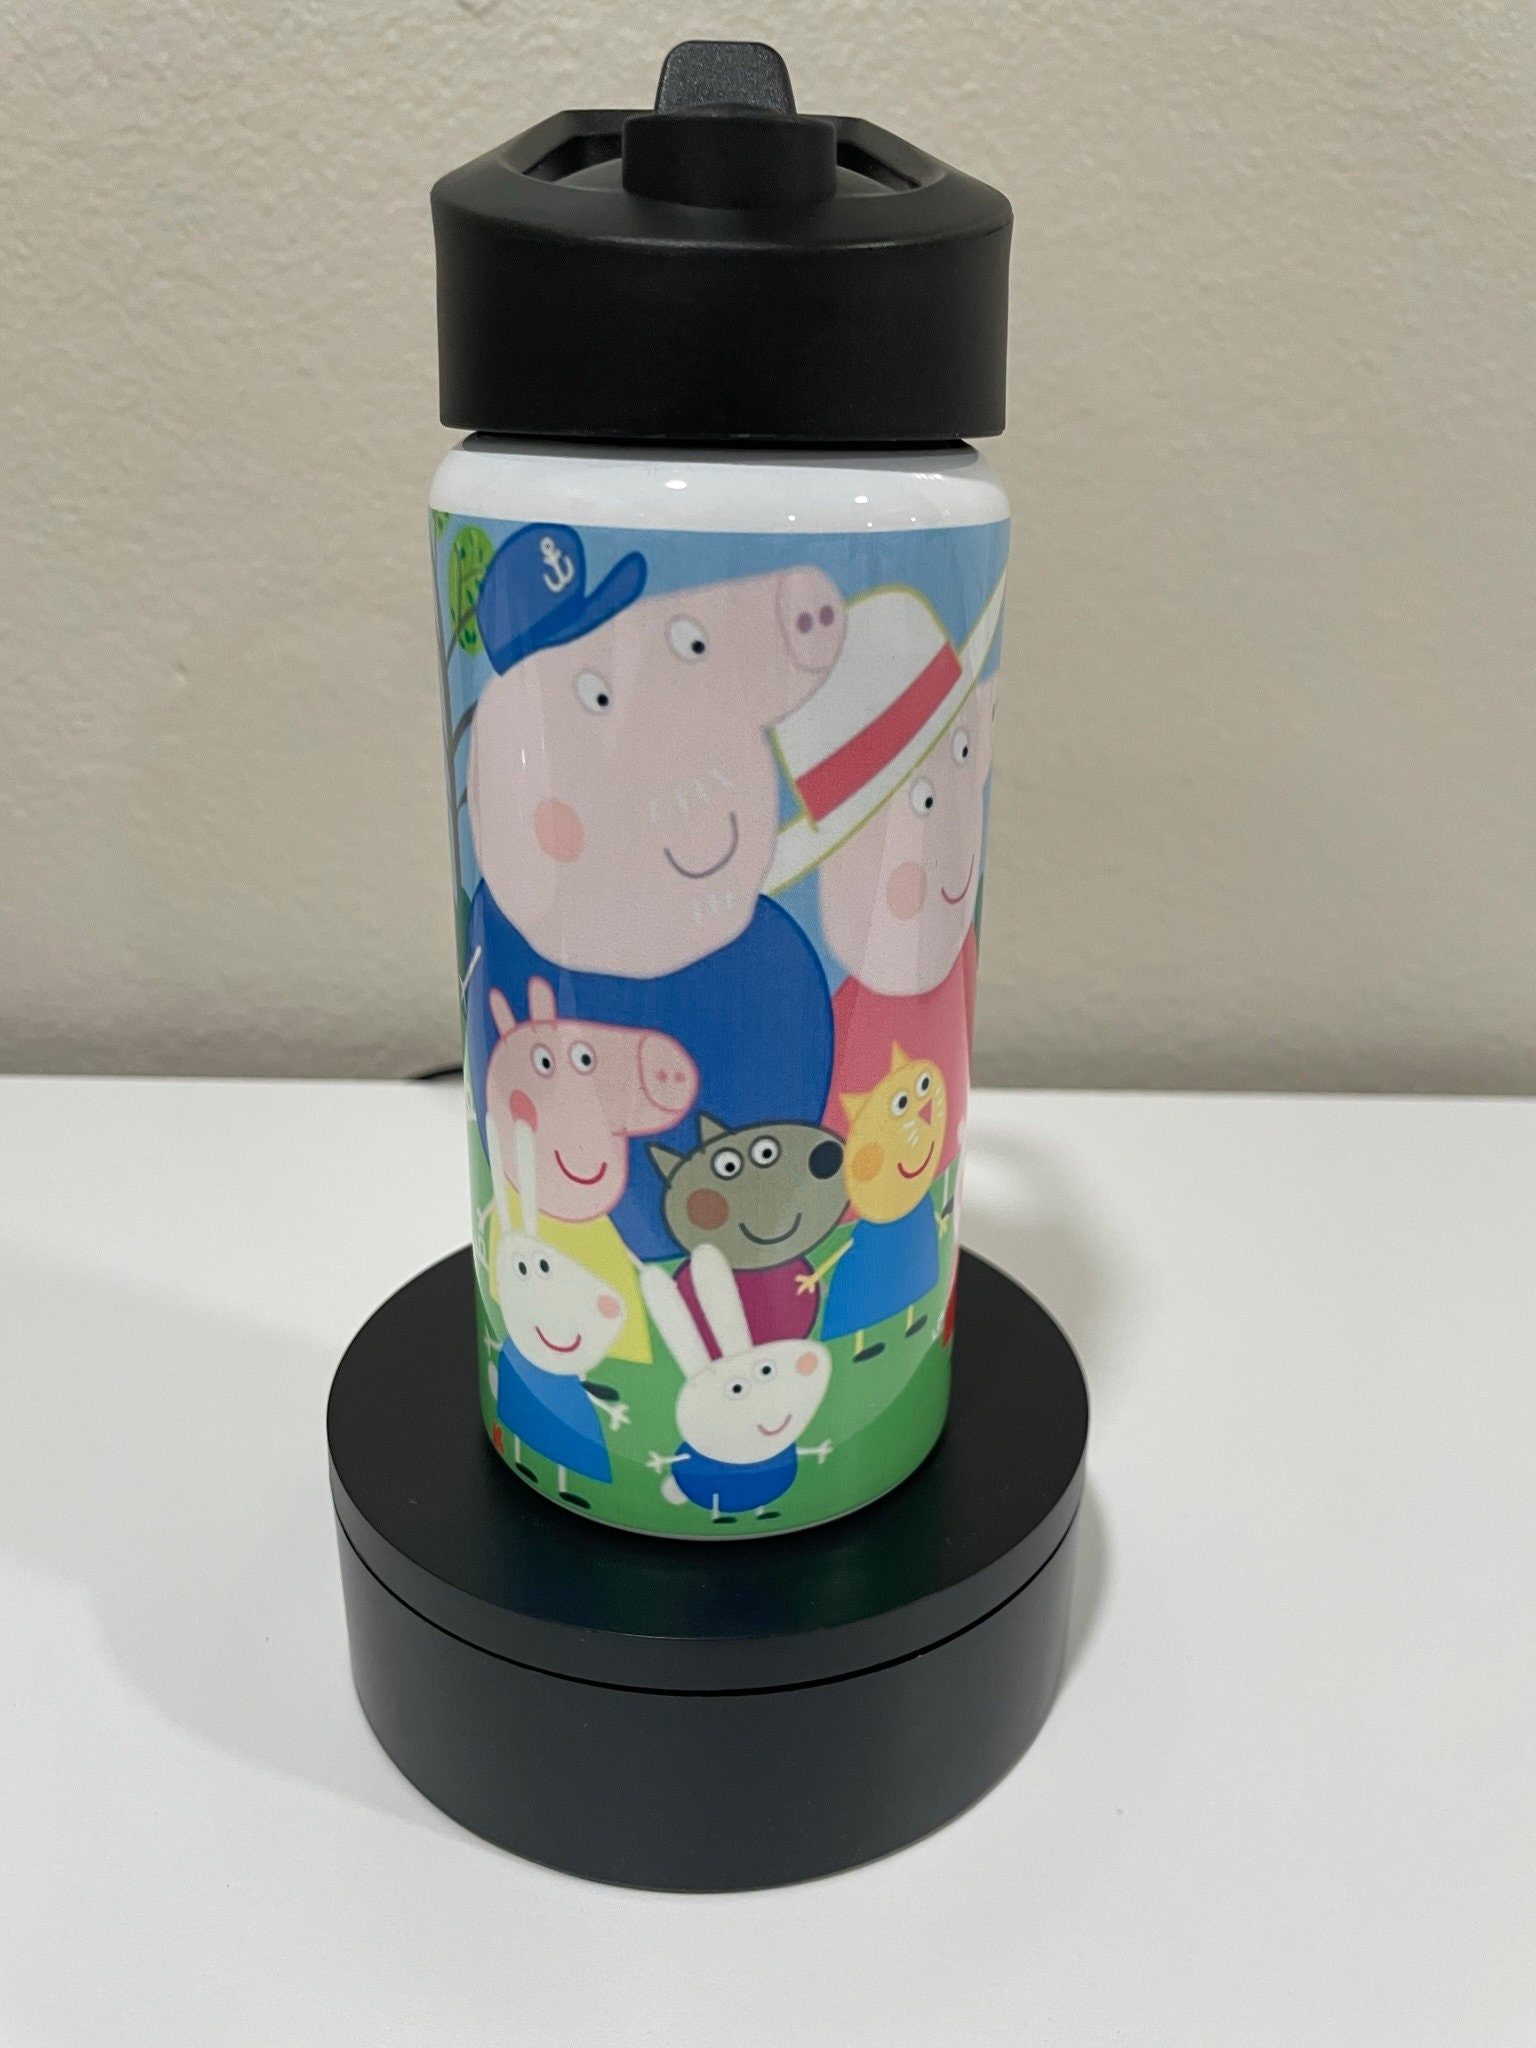 Peppa Pig Store [6-Pack] Peppa Pig Reusable 16 oz Sipper Tumbler Cups  Bundle with Peppa Pig Stickers…See more Peppa Pig Store [6-Pack] Peppa Pig